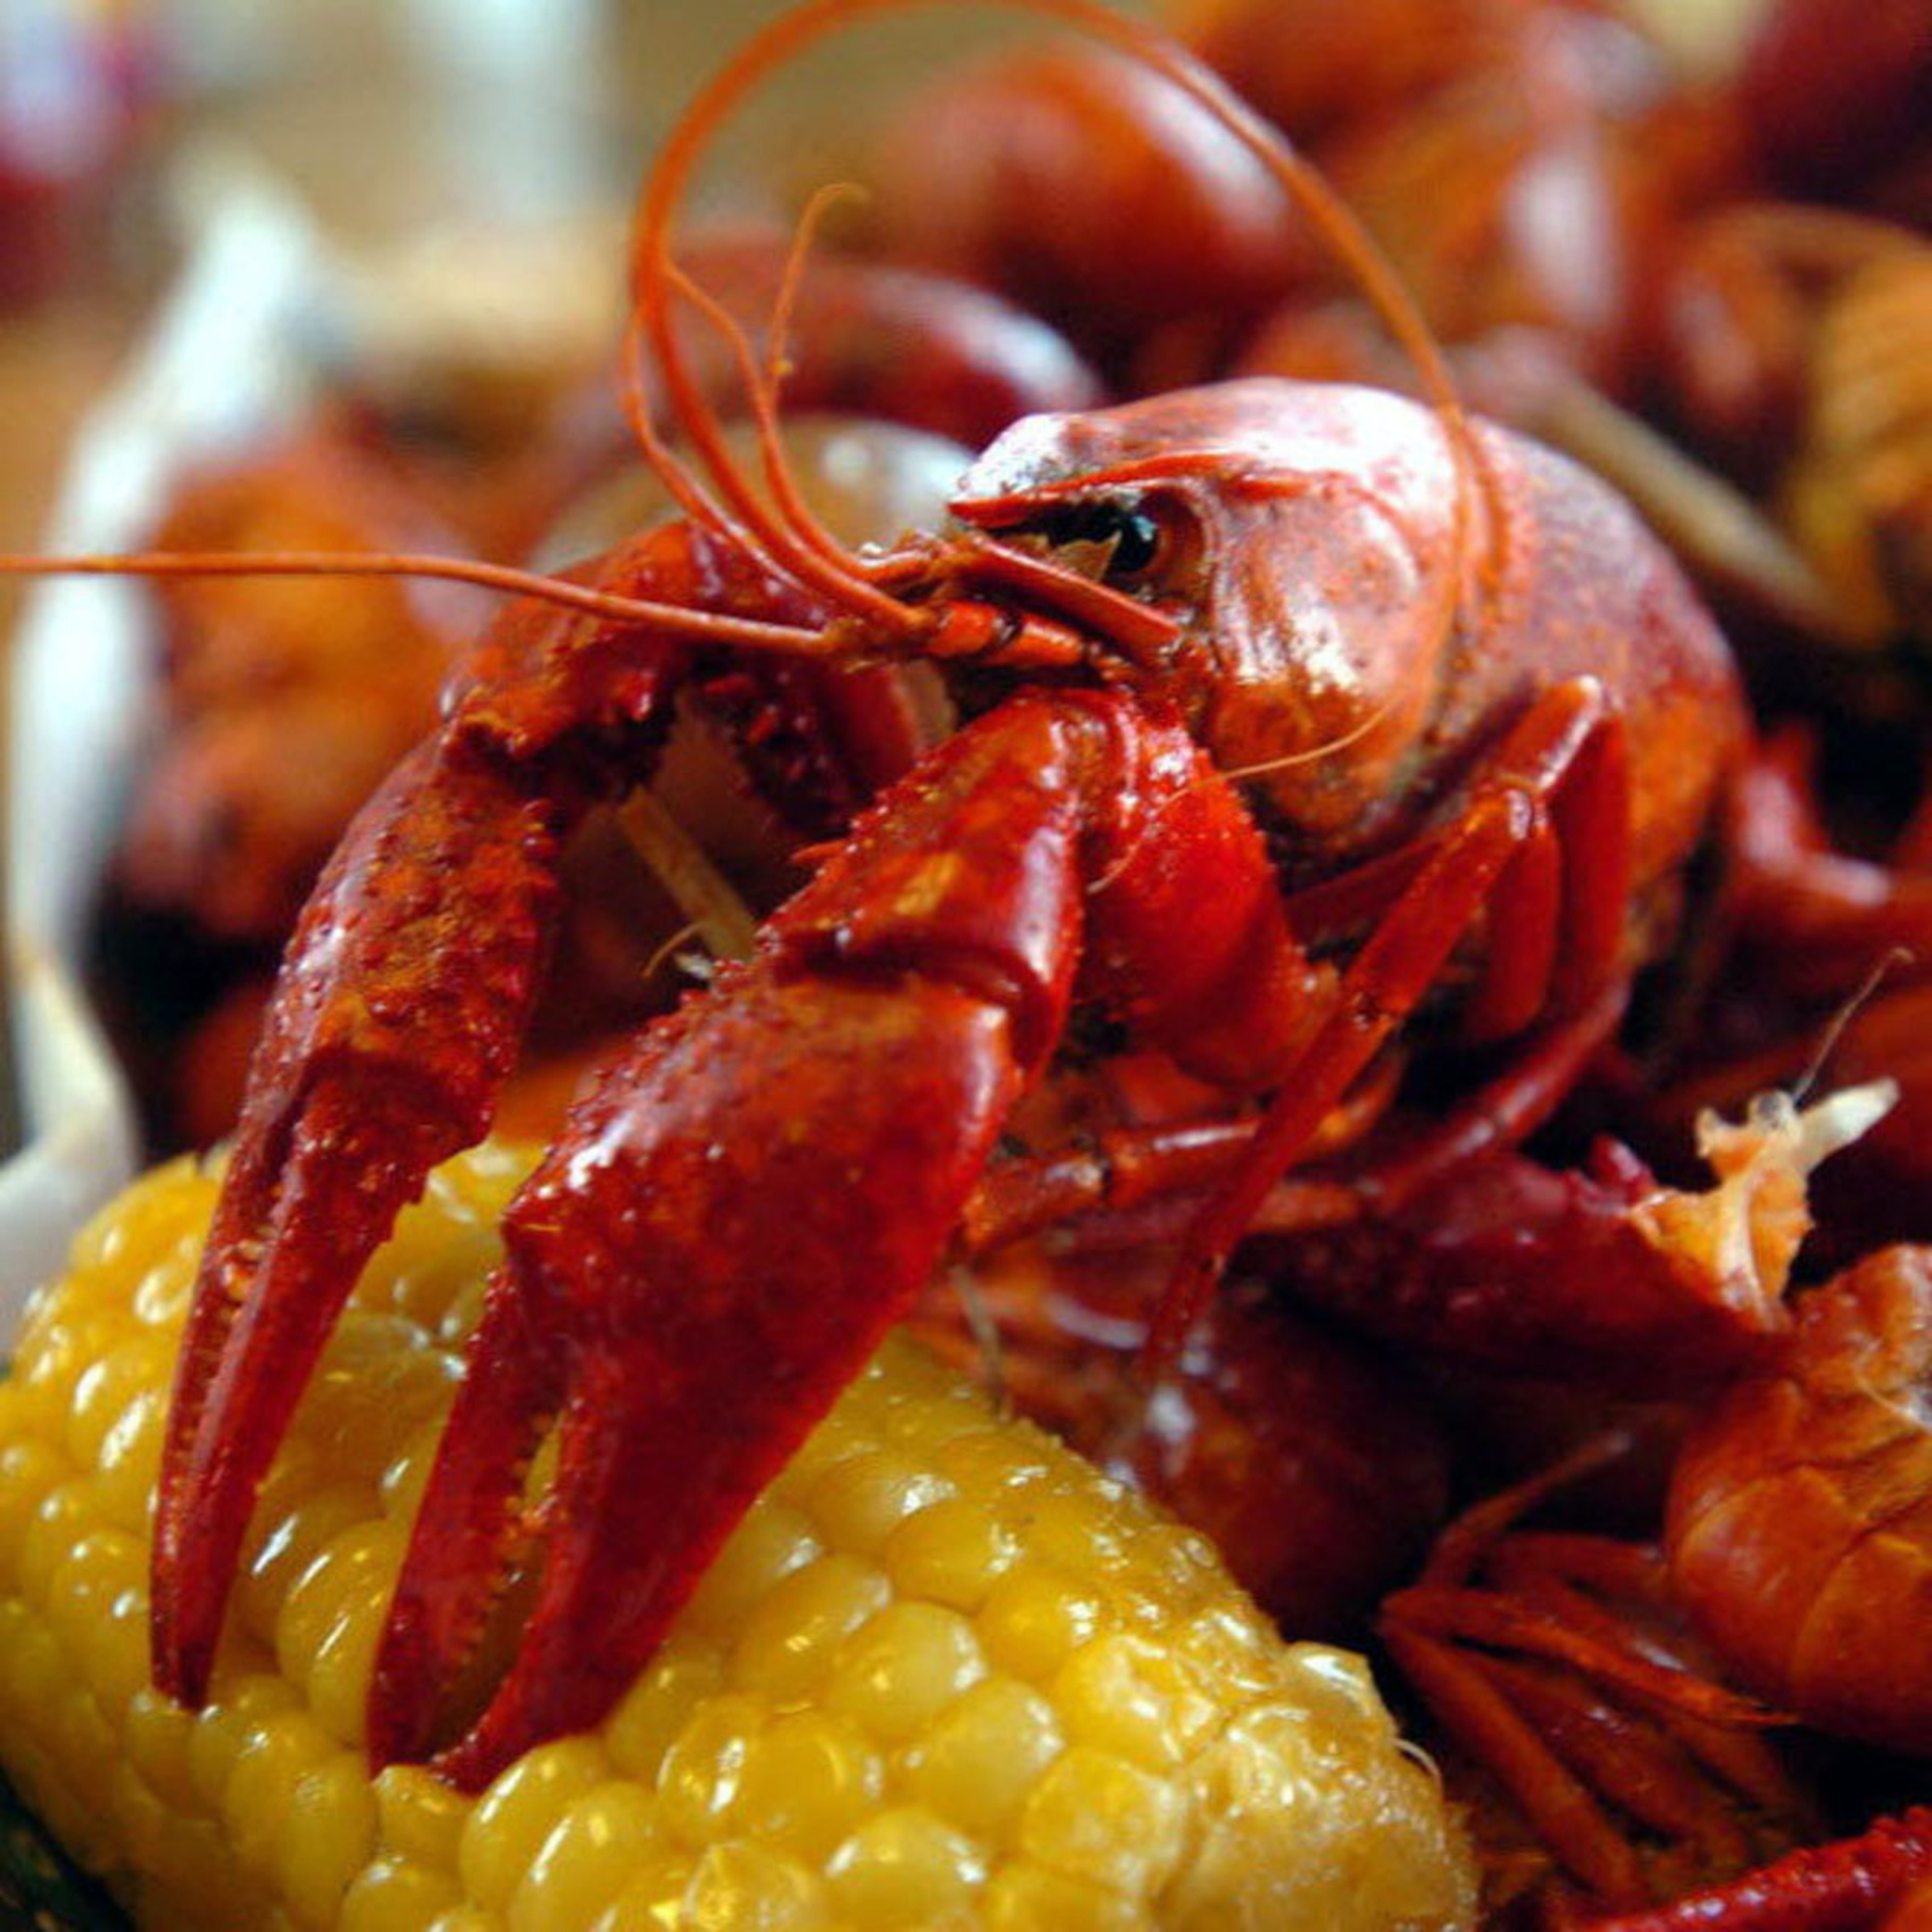 Astros Crawfish Boil: August 9th, 2021 - The Crawfish Boxes